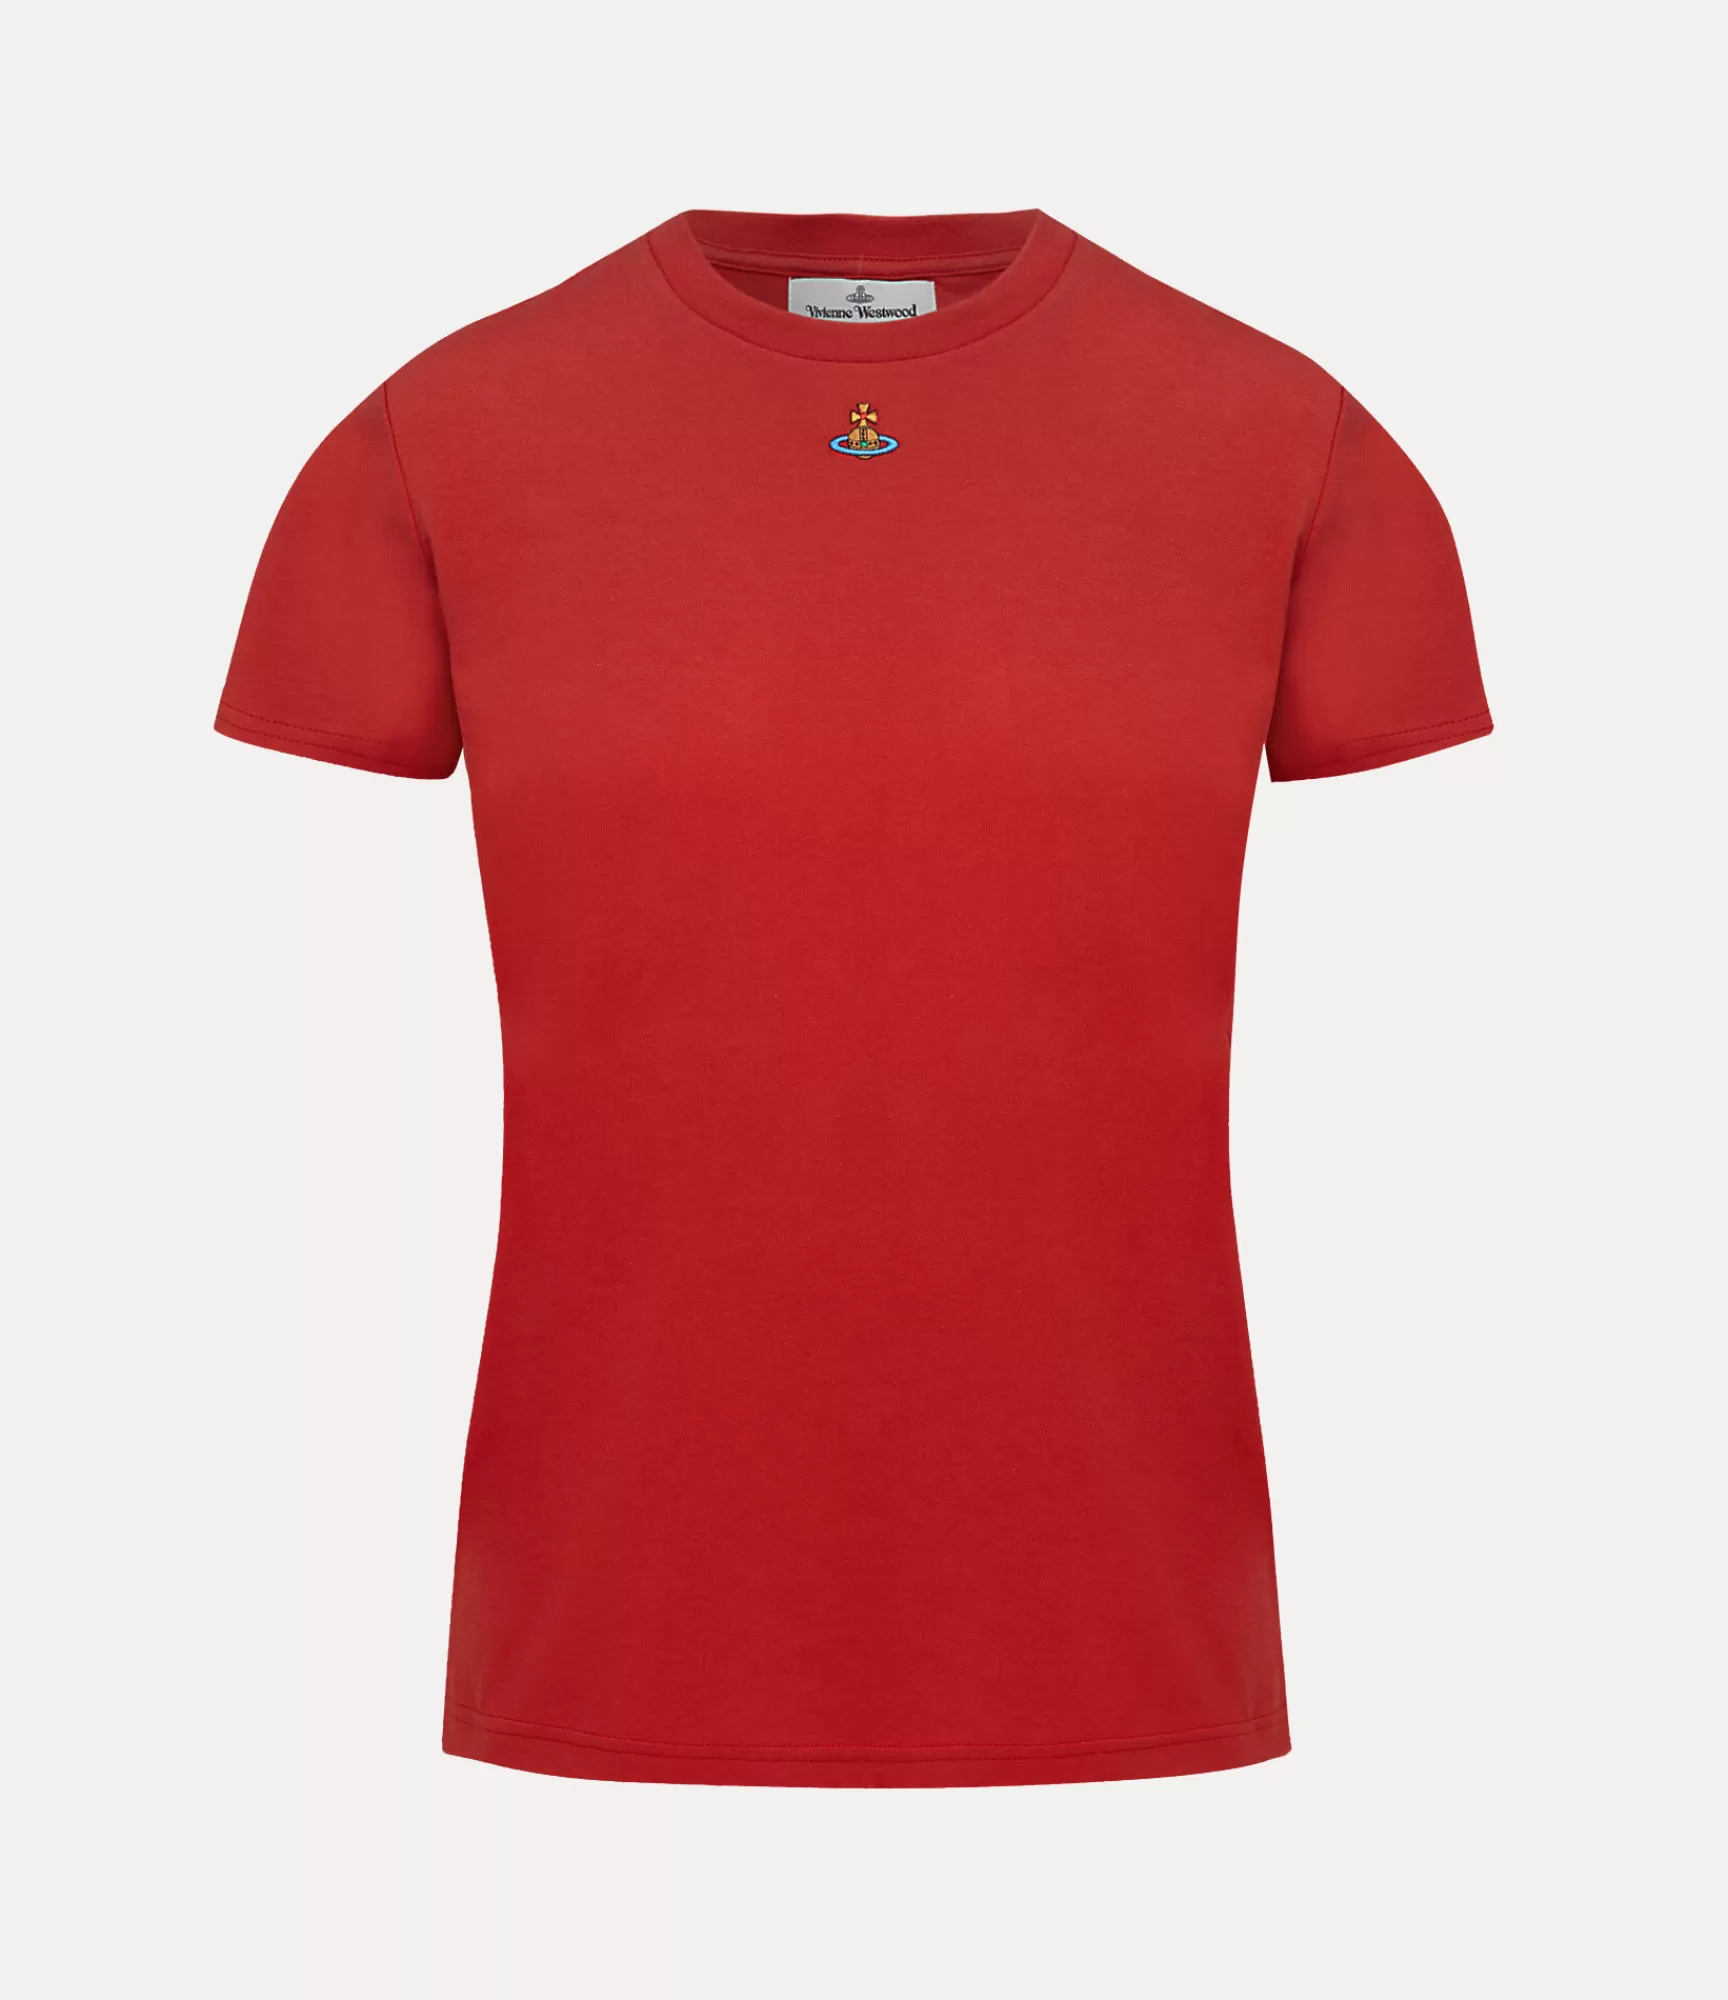 Vivienne Westwood T-Shirts and Polos*Orb peru' t-shirt Red